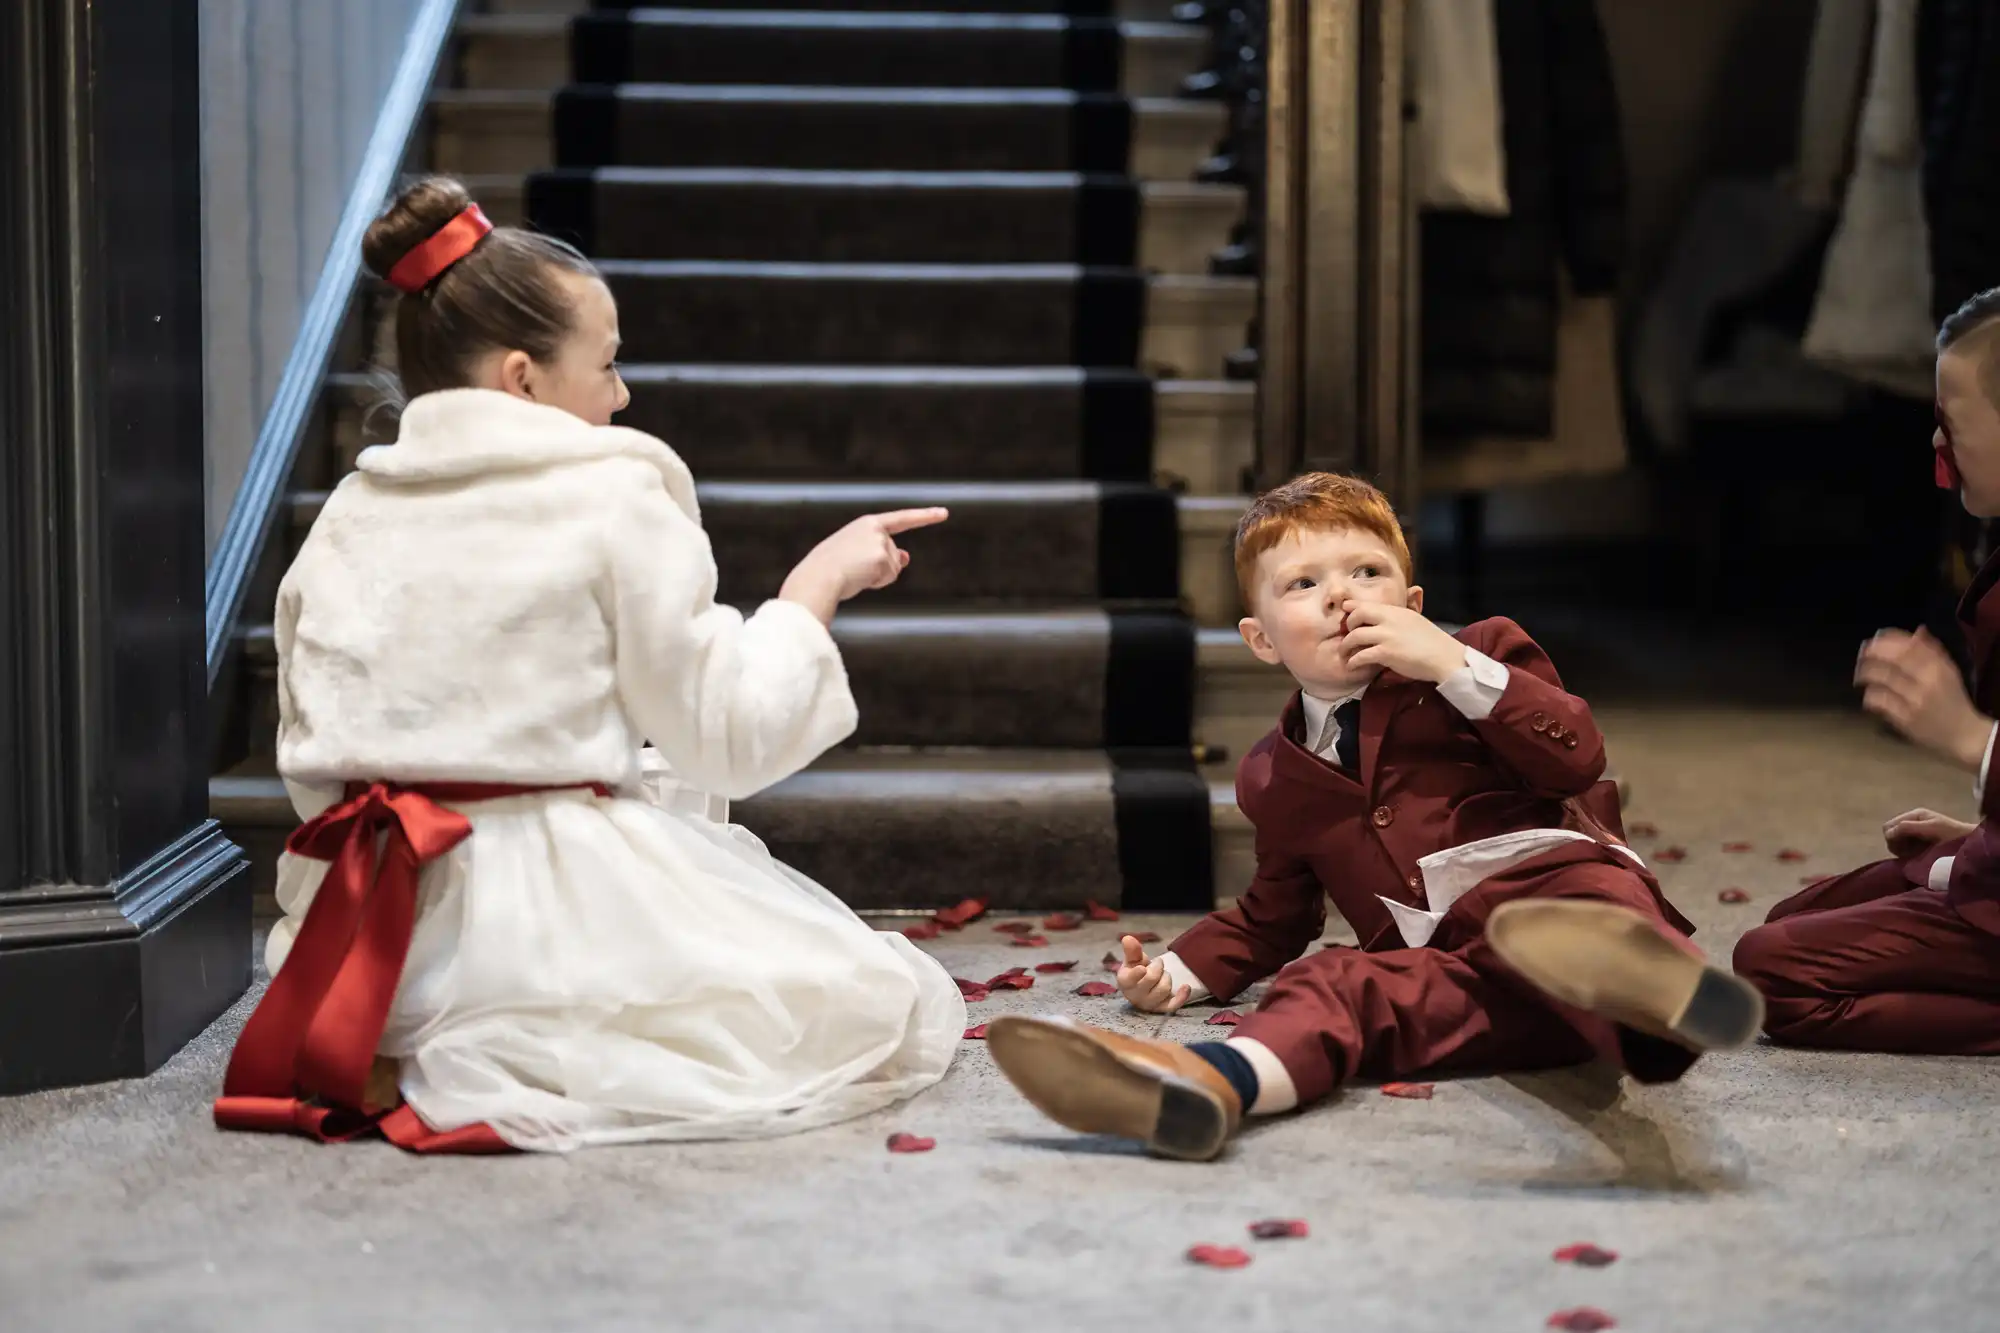 Two children dressed formally in white and red attire are sitting on the floor near a staircase; one points while the other fiddles with a petal amidst scattered rose petals.